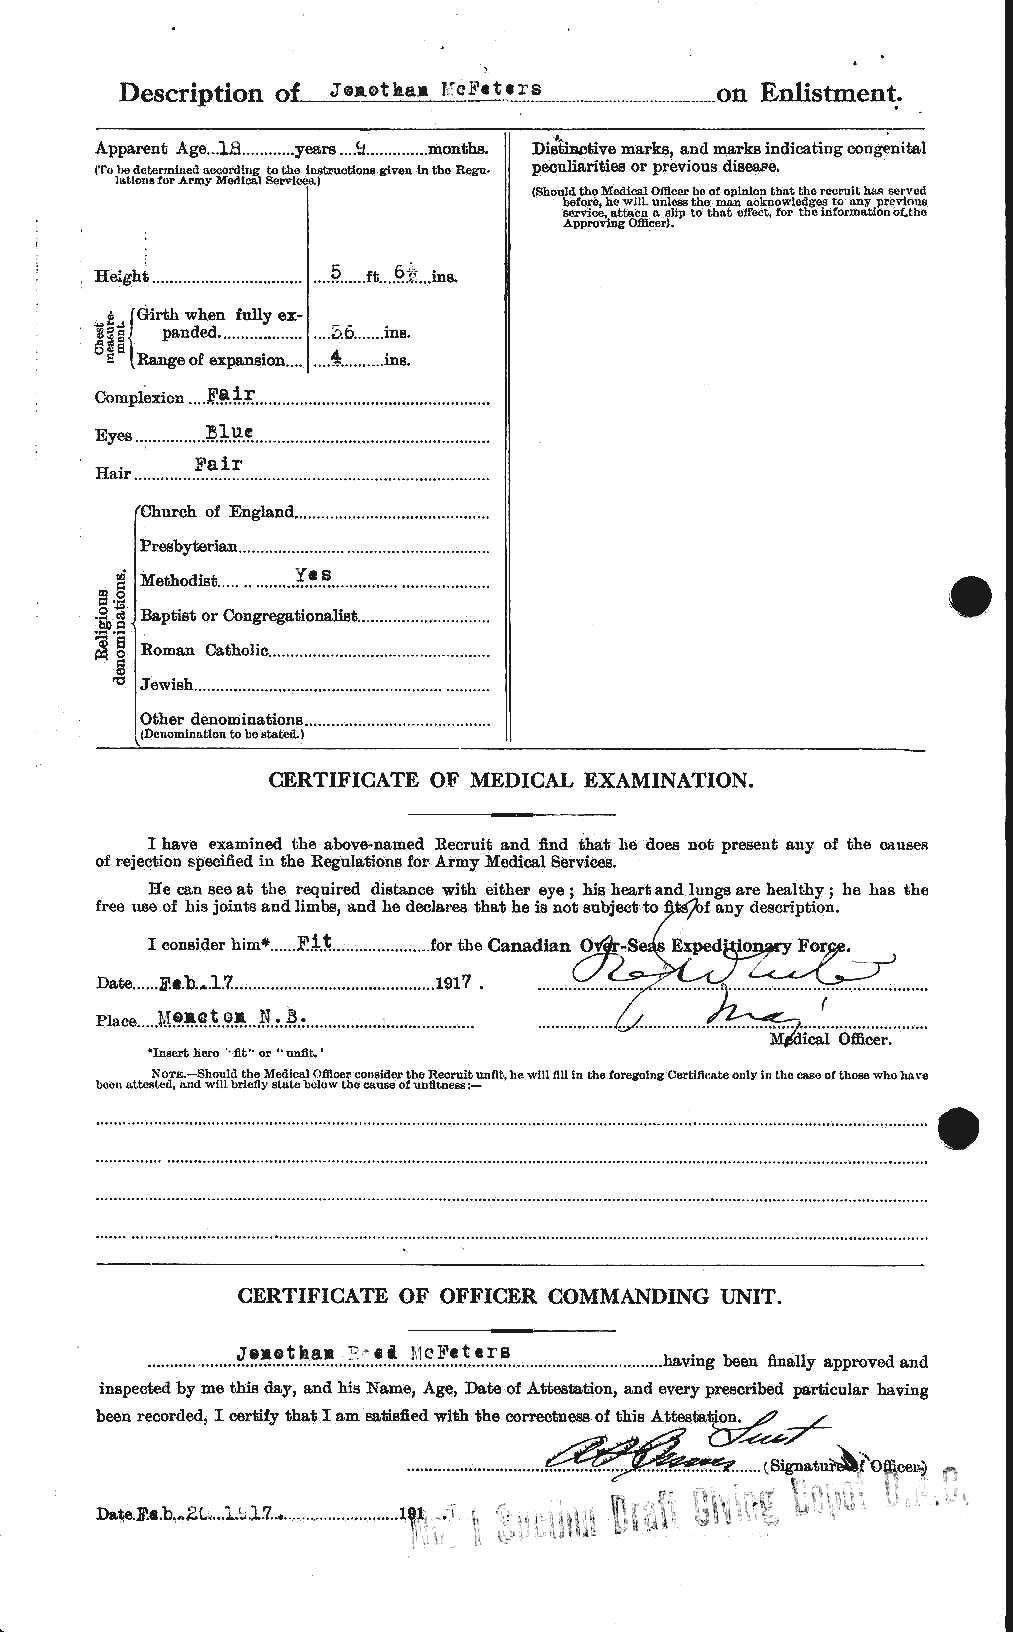 Personnel Records of the First World War - CEF 522620b